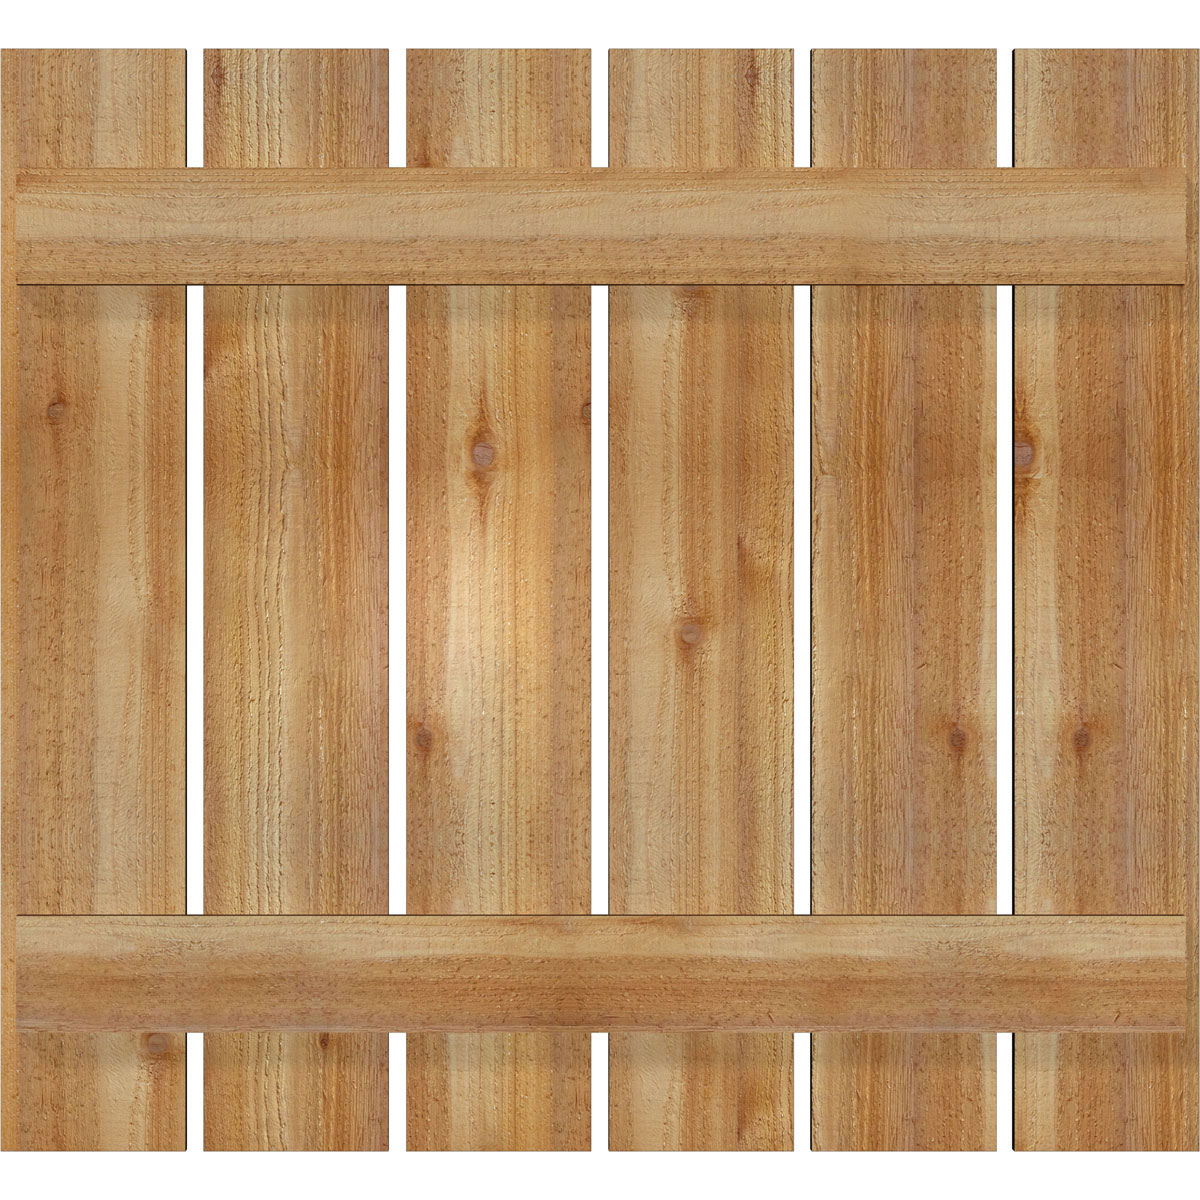 Ekena Millwork 2-Pack 34.75-in W x 32-in H Unfinished Board and Batten Spaced Wood Western Red cedar Exterior Shutters